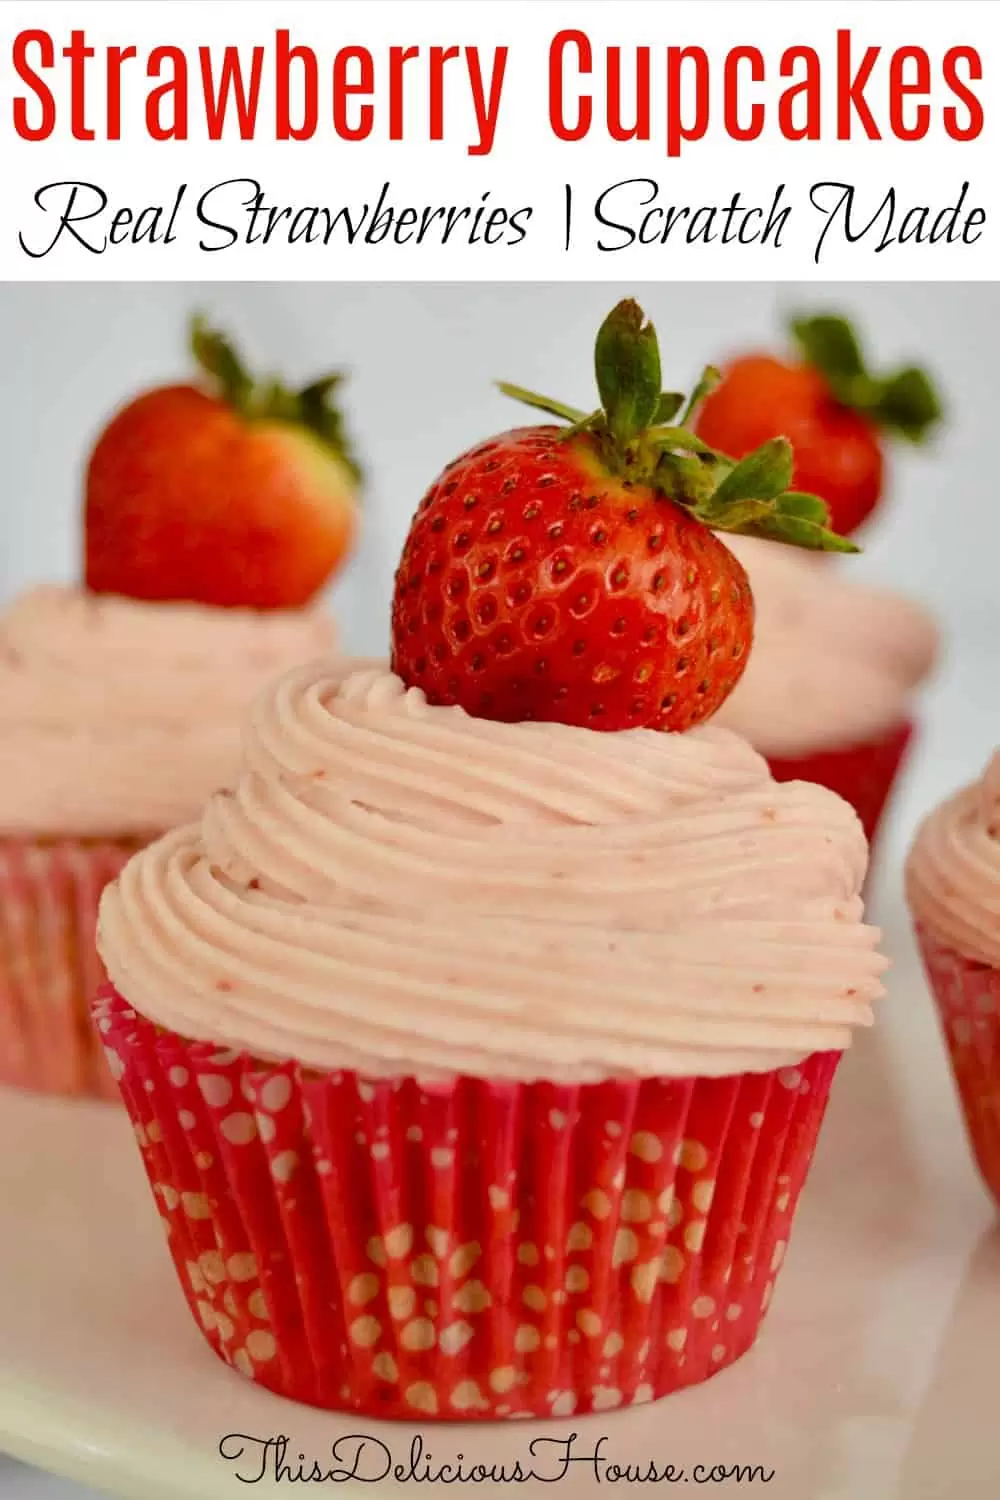 Strawberry Cupcakes from scratch. 